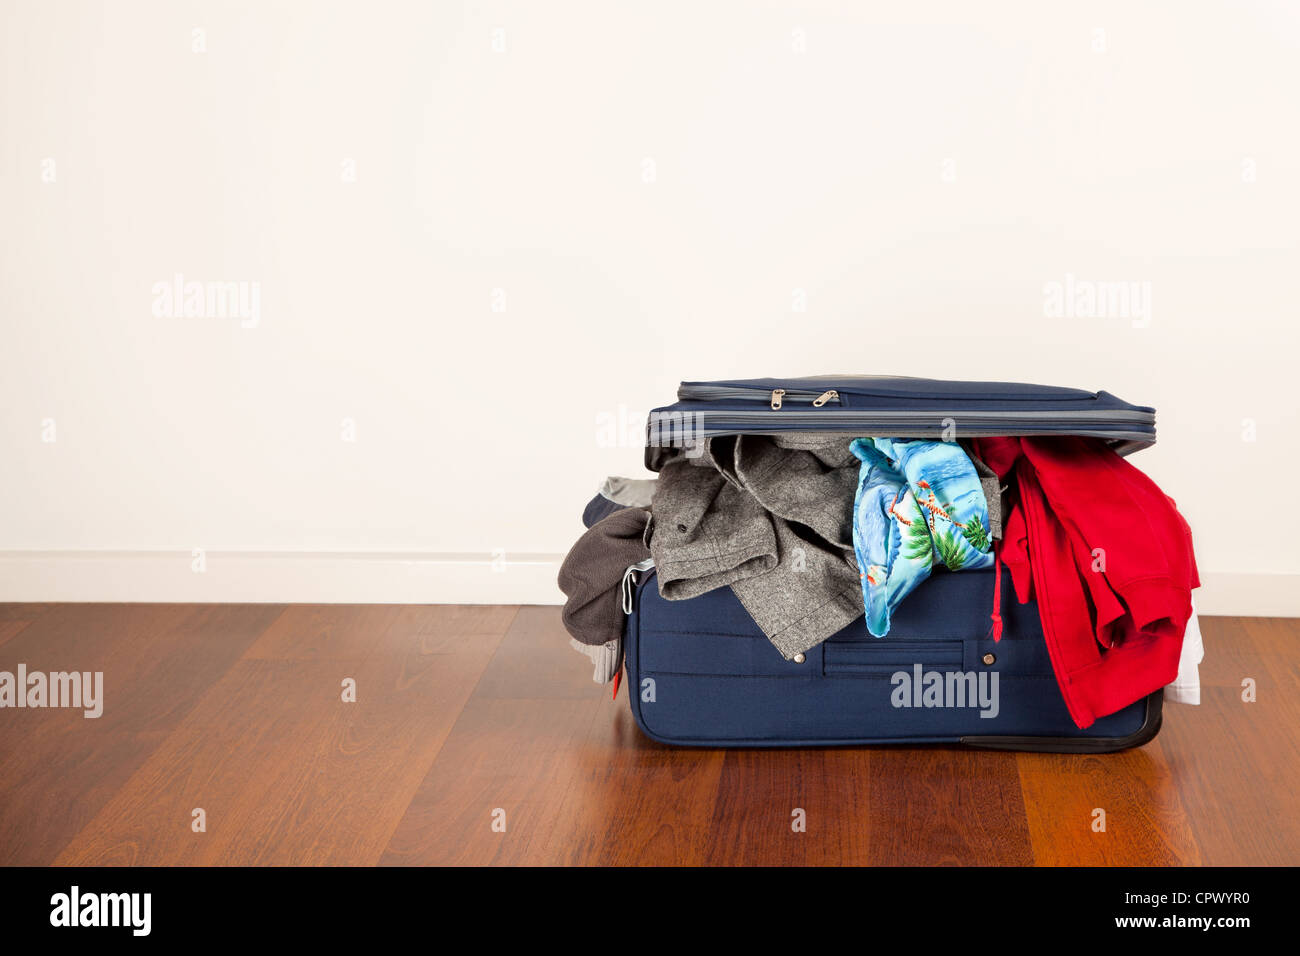 A suitcase overflowing with clothes Stock Photo